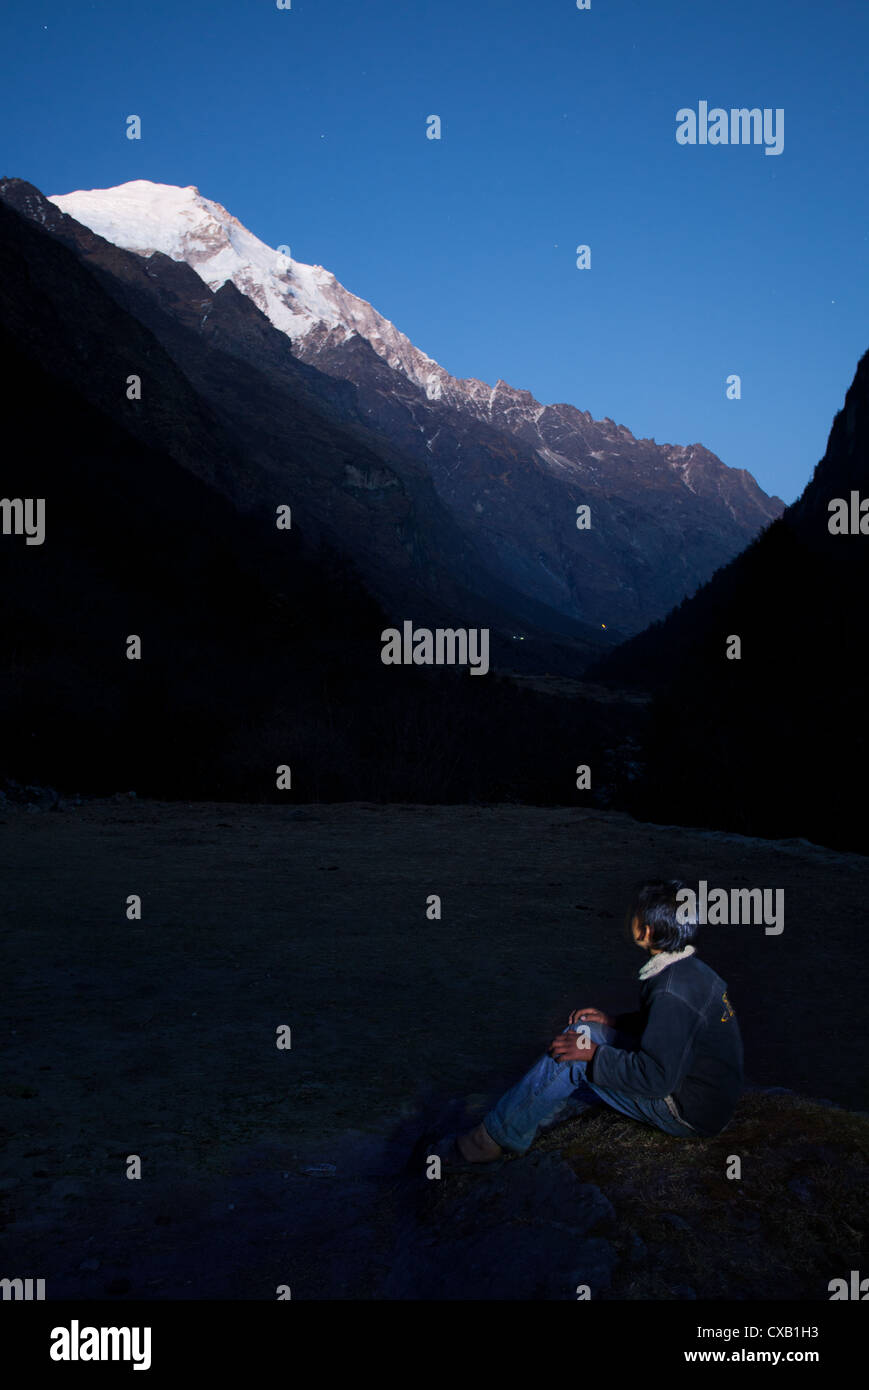 Nepalese man looking up at a snowcapped mountain at night, Langtang Valley, Nepal Stock Photo